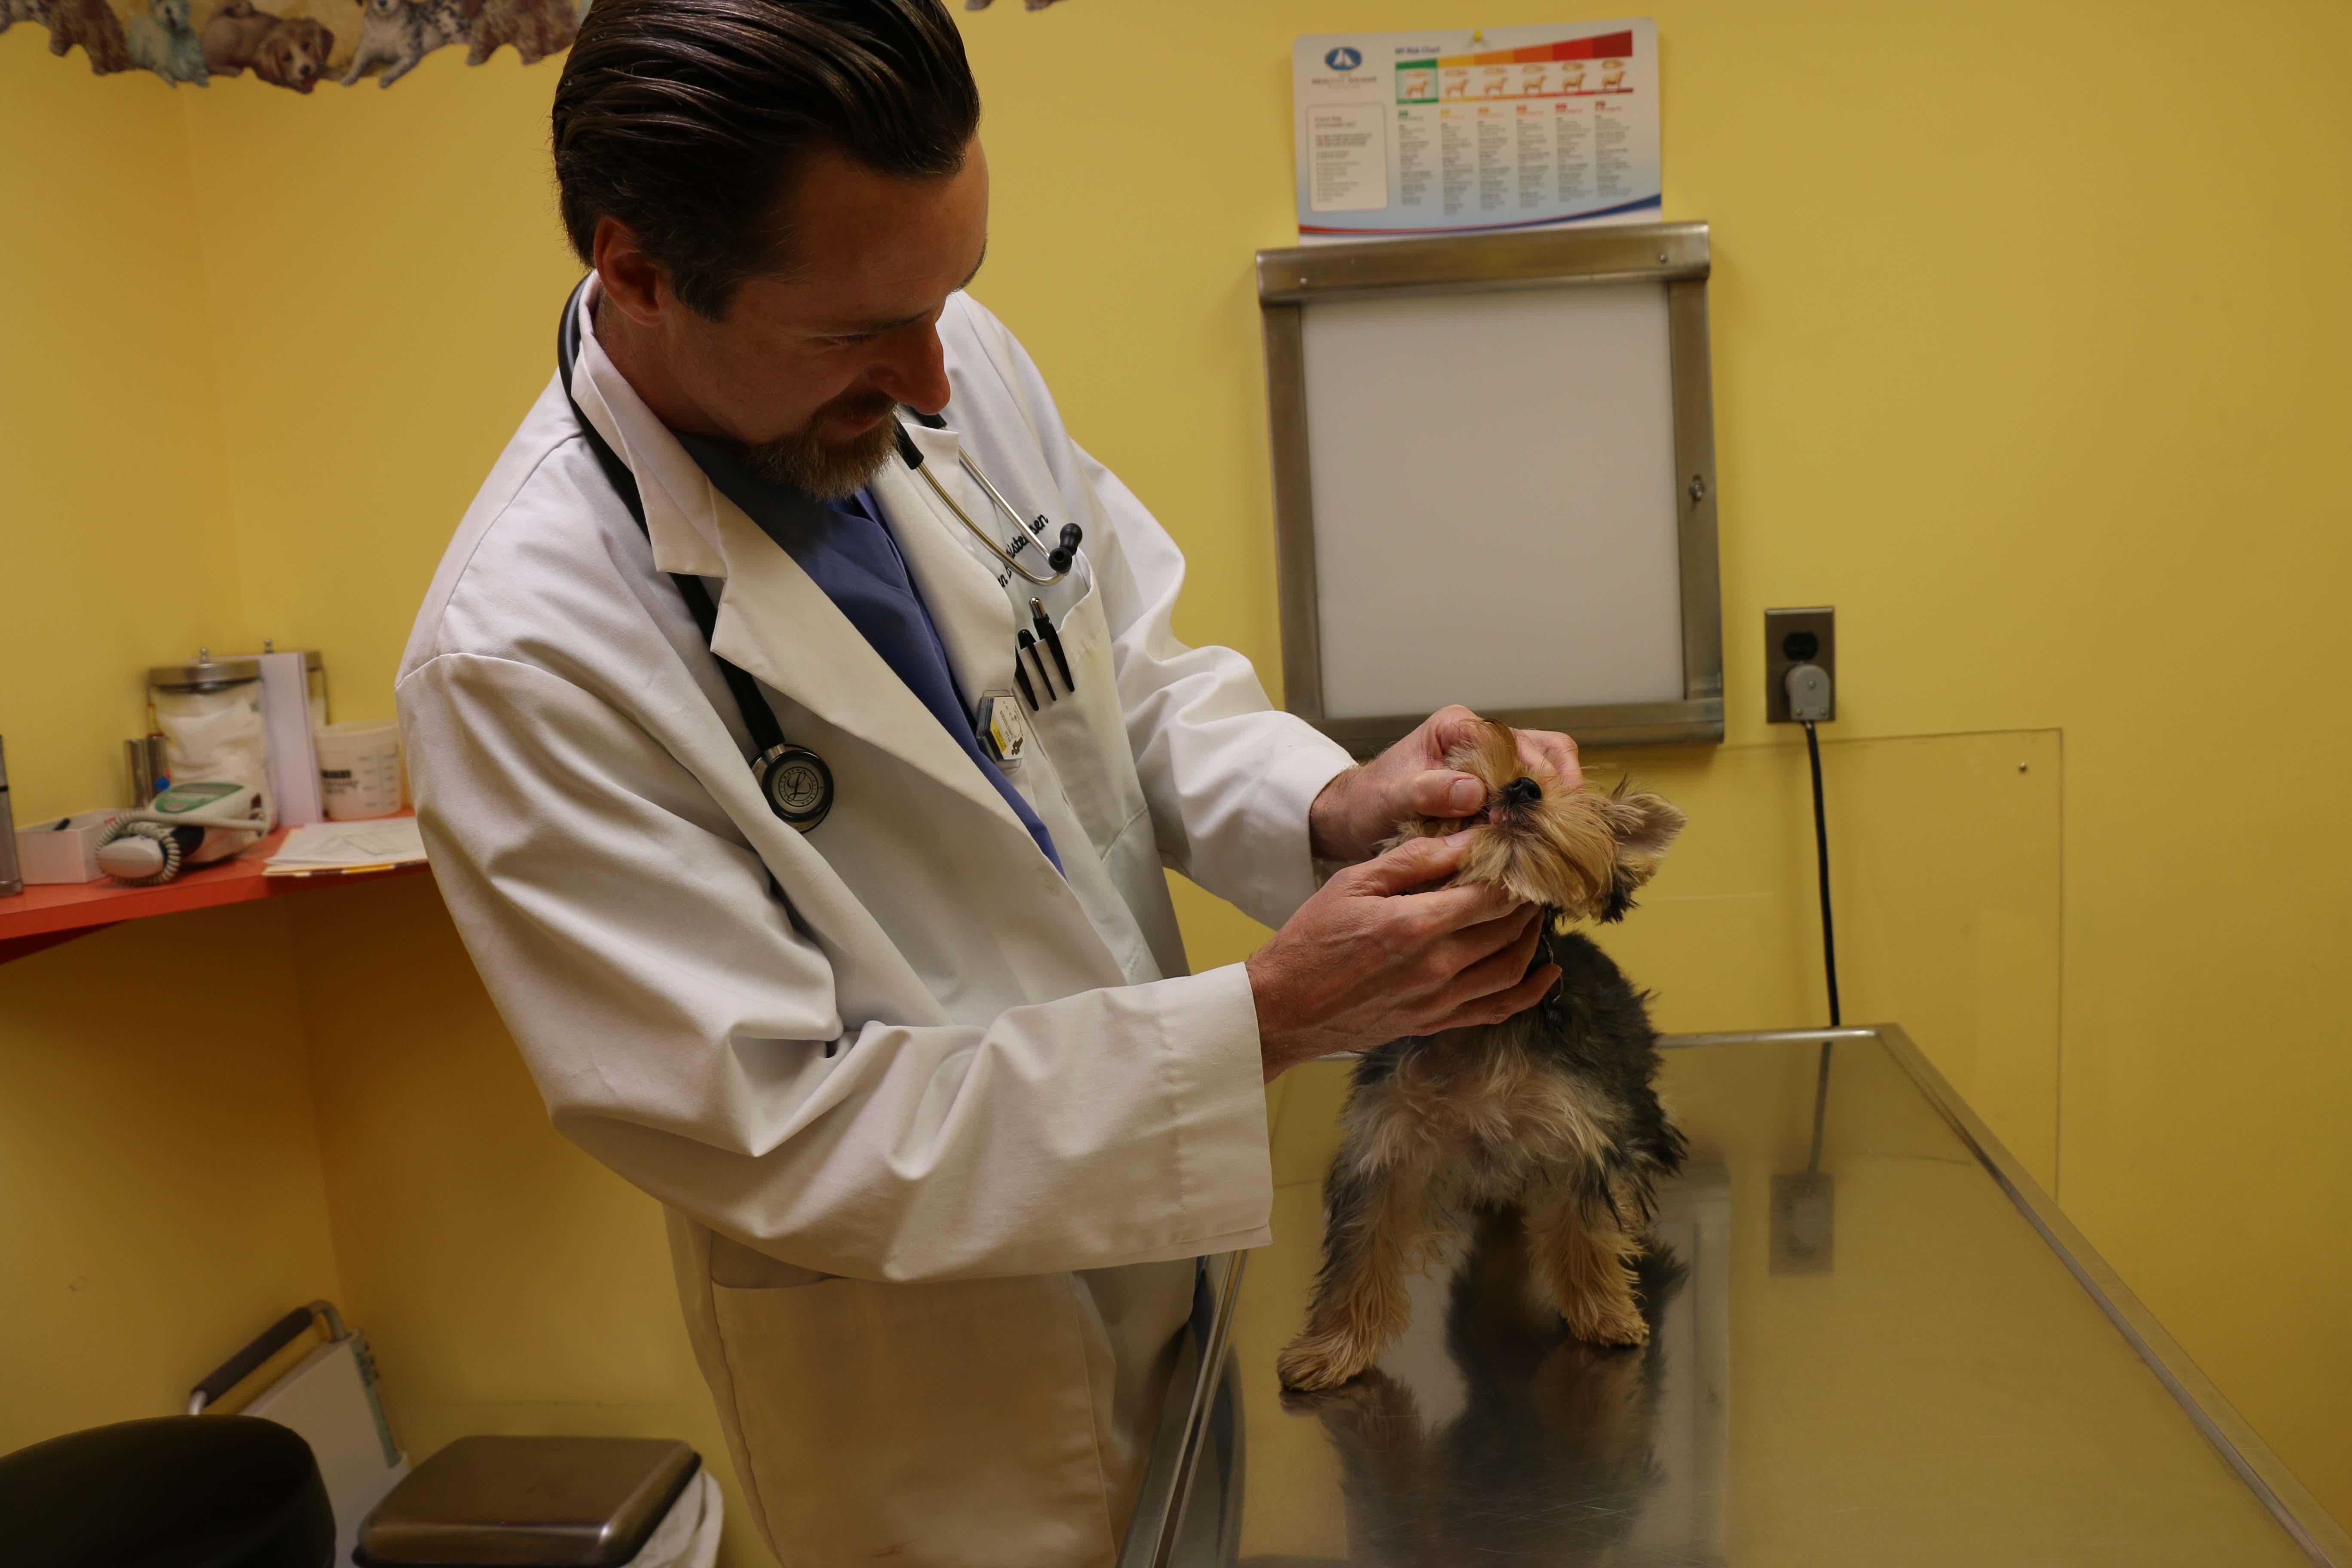 Dr. Christensen takes a peak at a Yorkie’s teeth and gums. Regular dental examinations are critical and a part of every wellness visit at Tranquility.